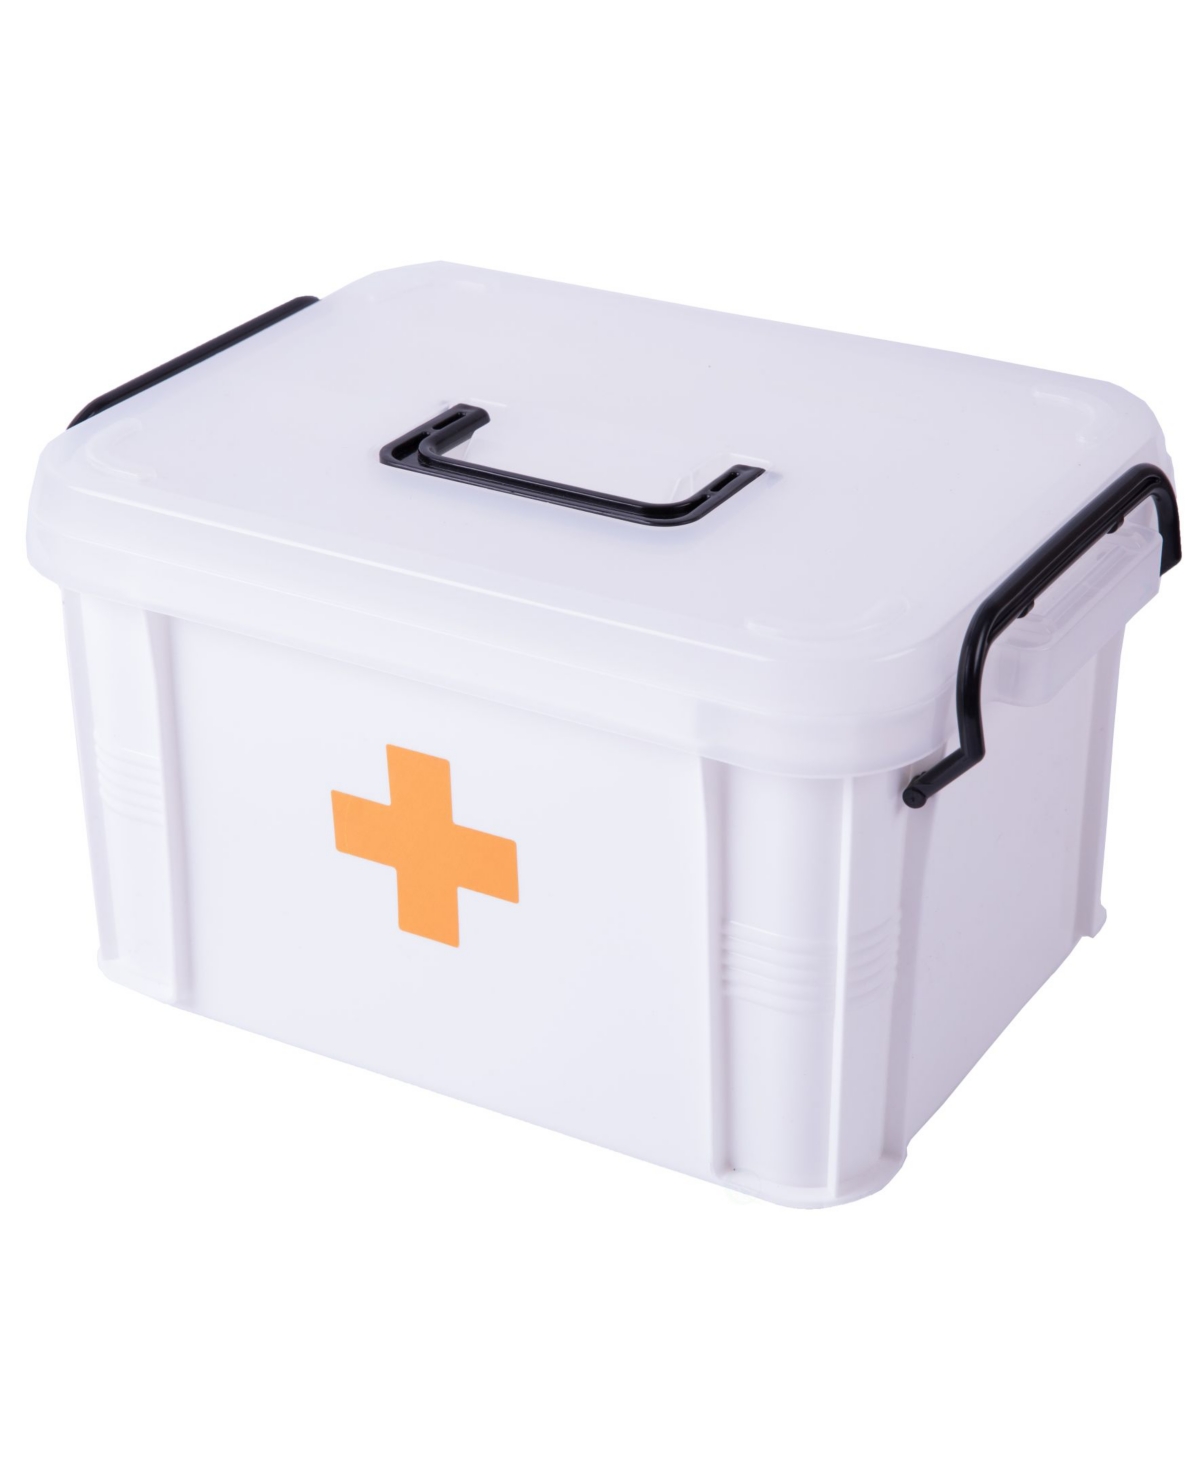 Vintiquewise Small First Aid Medical Kit - White